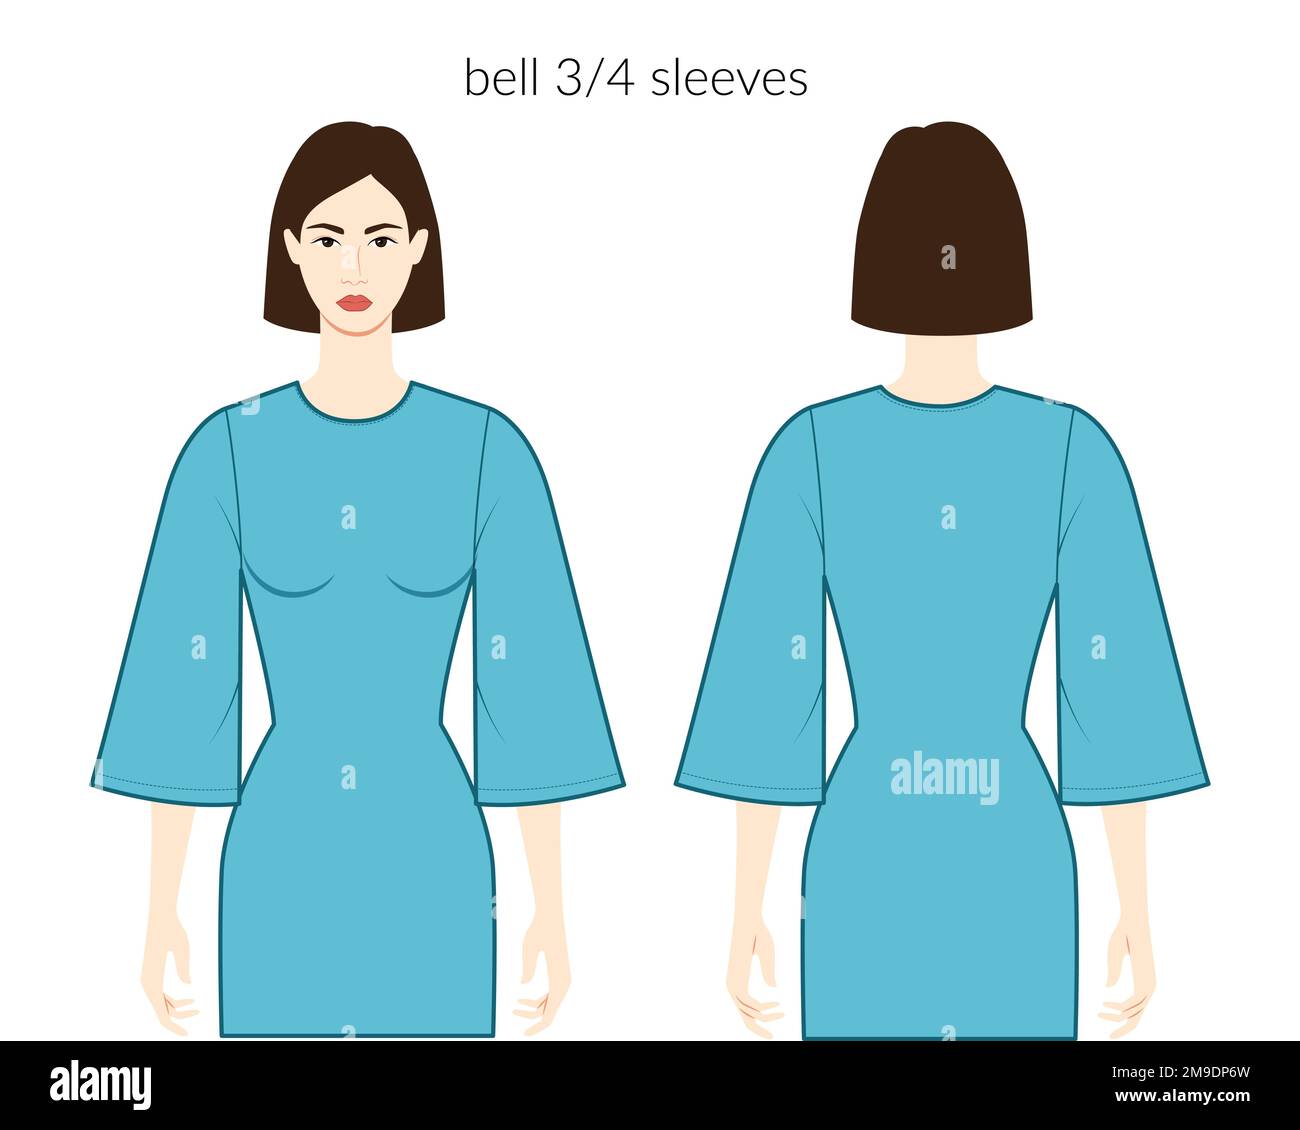 Bell sleeves cornet clothes character lady in dress, top, shirt ...